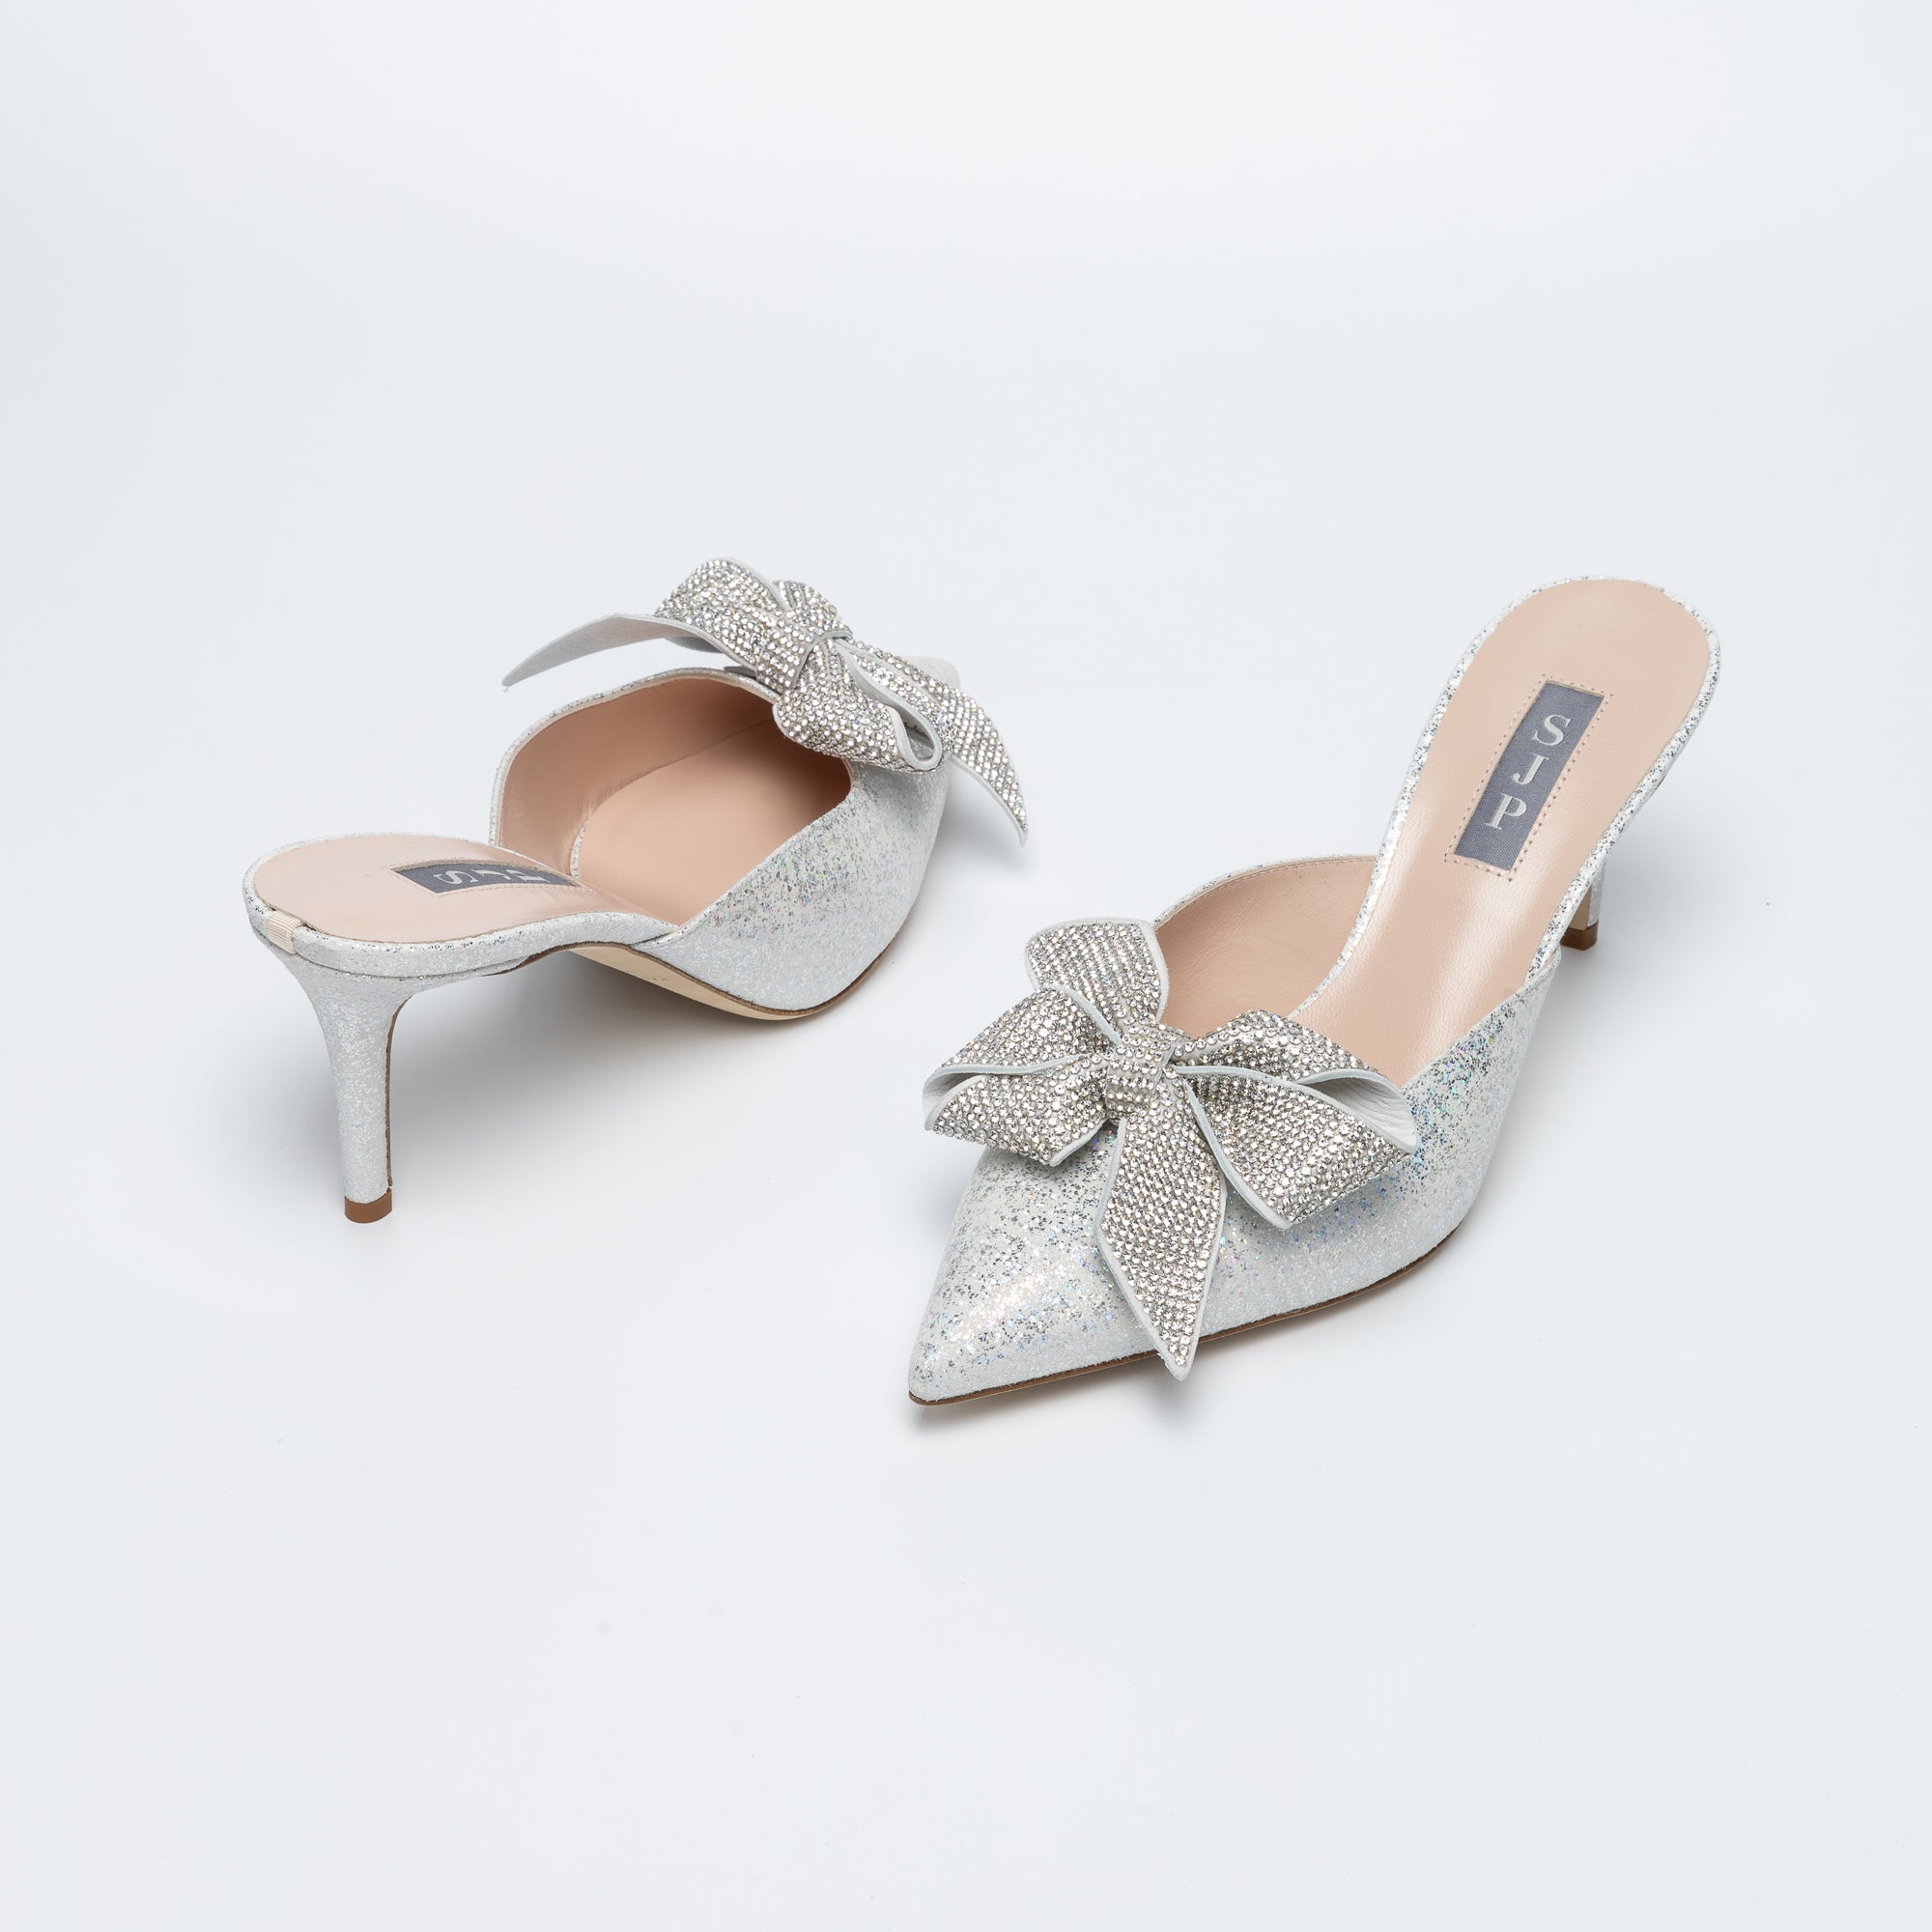 SJP by Sarah Jessica Parker Paley Frosty Suede Mules 70mm